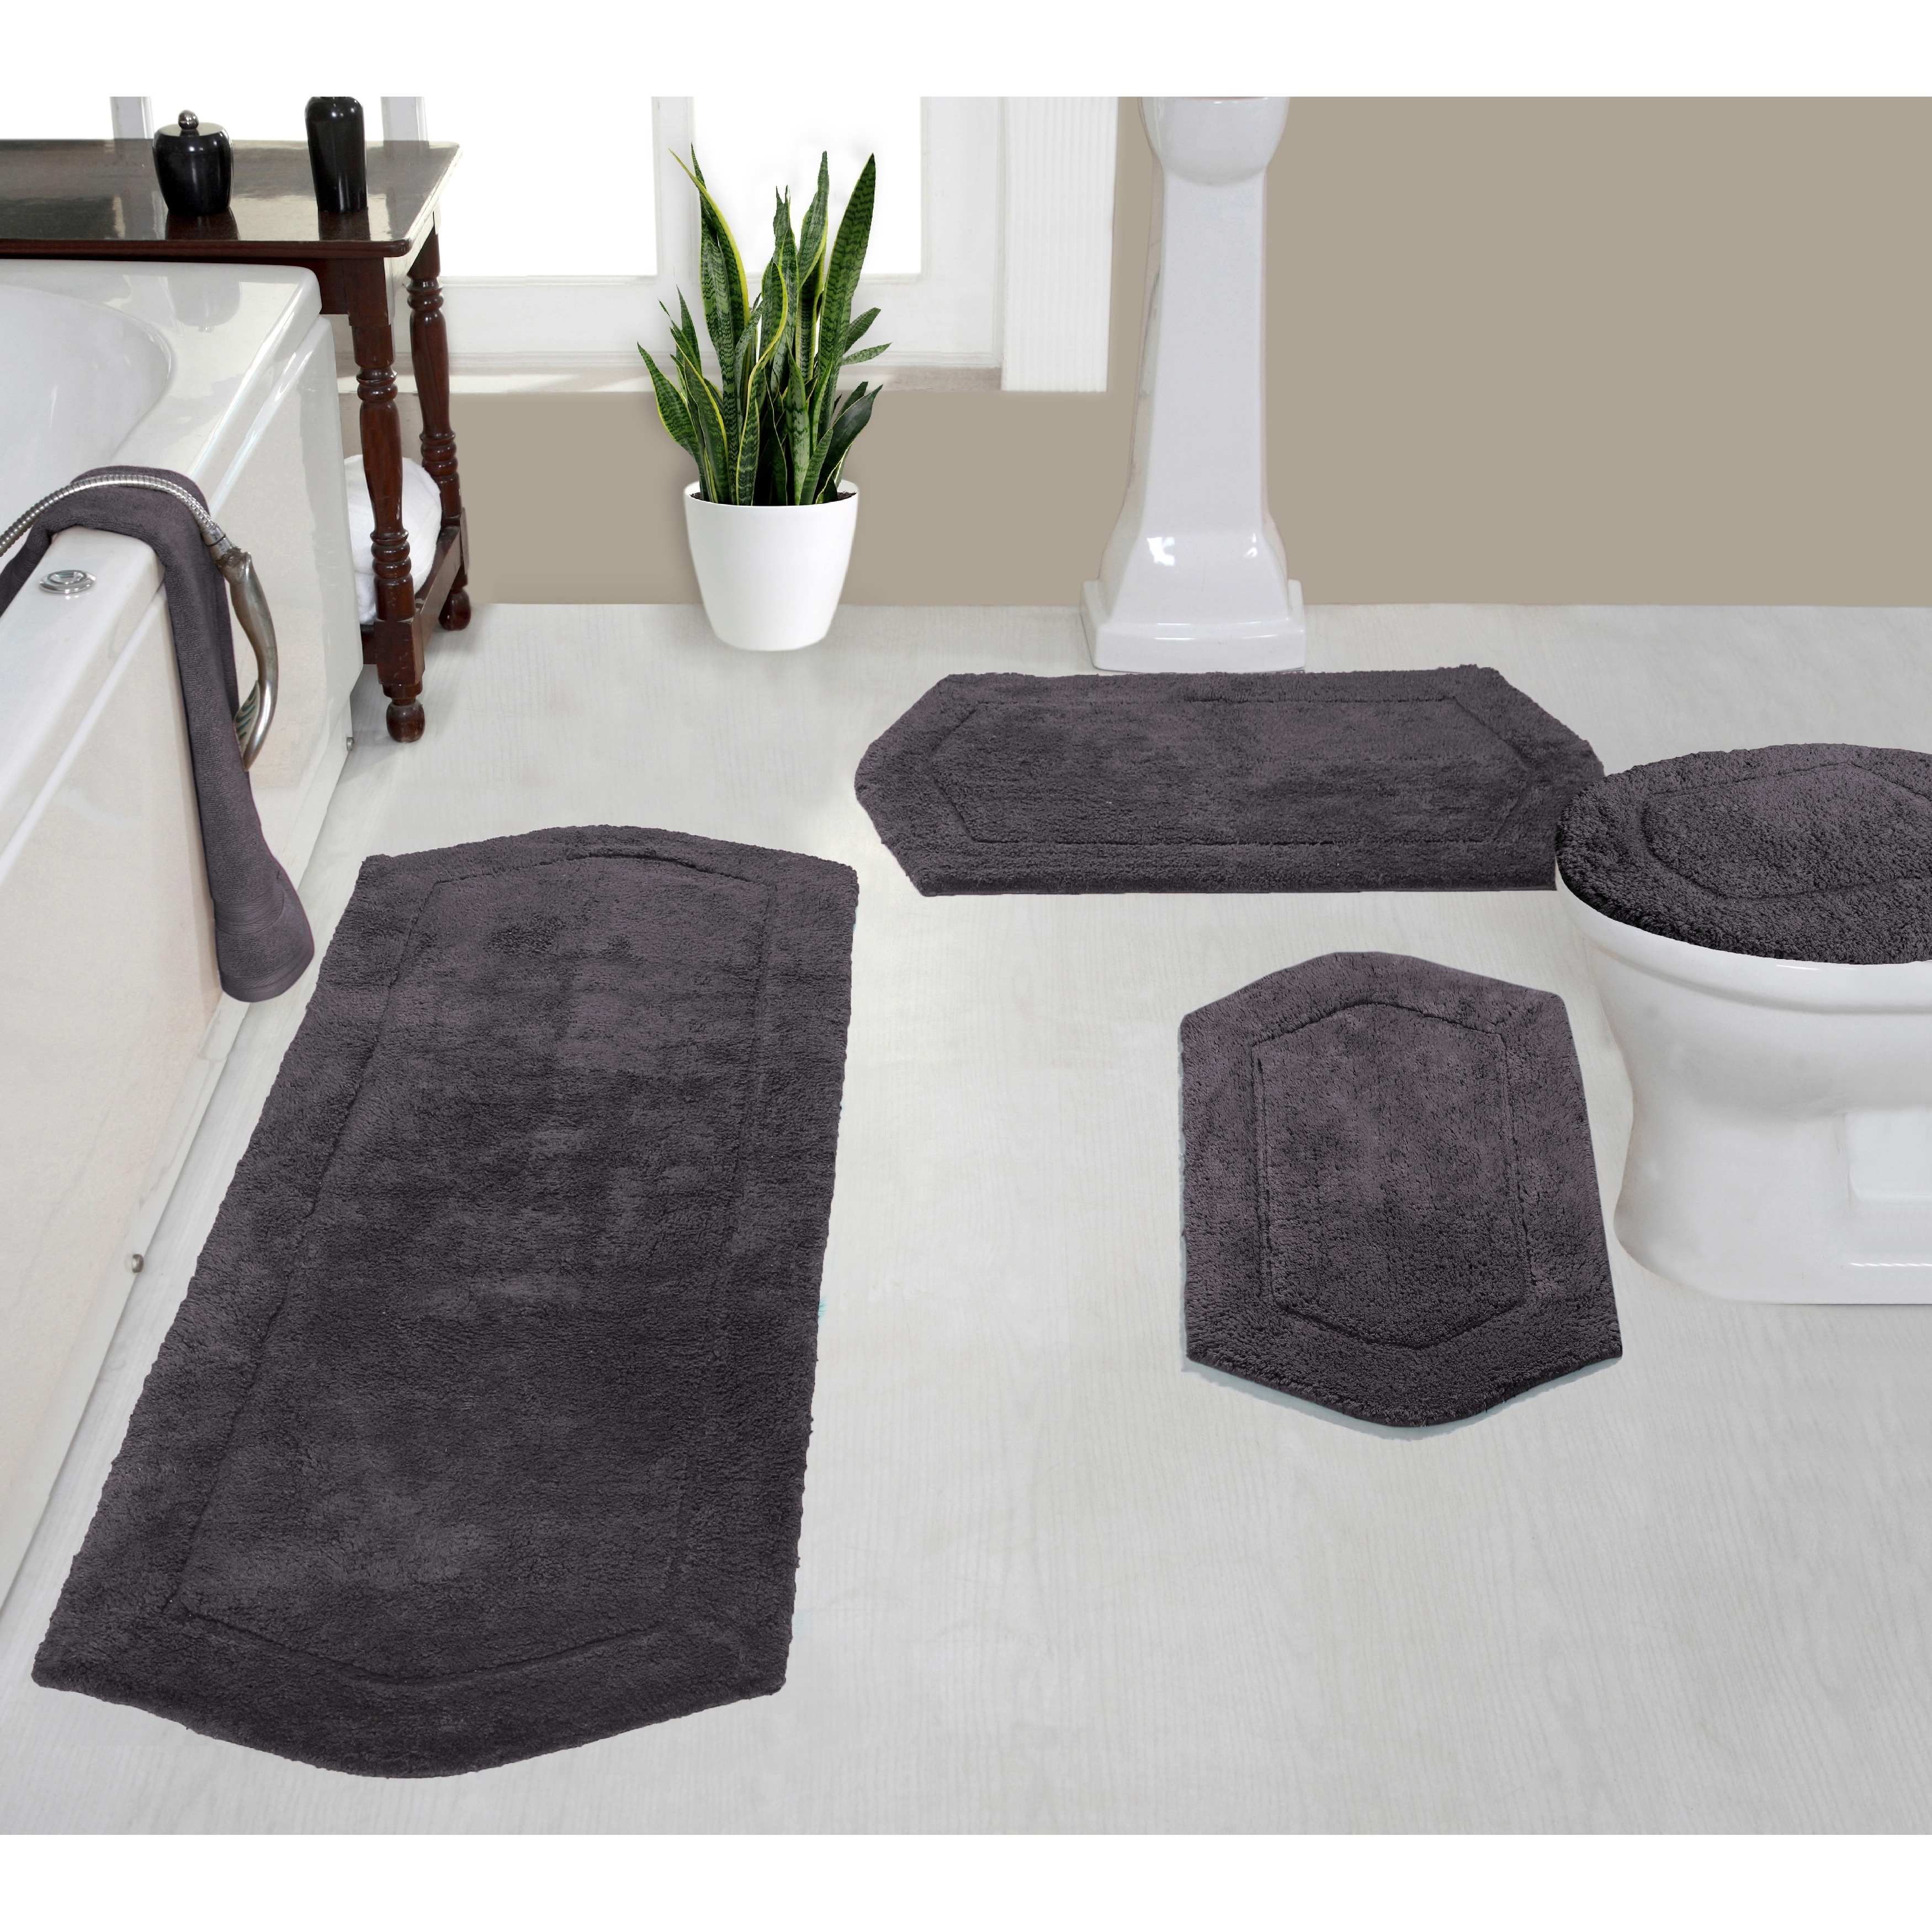 https://ak1.ostkcdn.com/images/products/is/images/direct/75fc28d6c6470af772fc516c84b13ad872294563/Home-Weavers-Bathroom-Rug%2C-Cotton-Soft%2C-Water-Absorbent-Bath-Rug%2C-Non-Slip-Shower-Rug-4-Piece-Set-with-Toilet-Lid-Cover.jpg